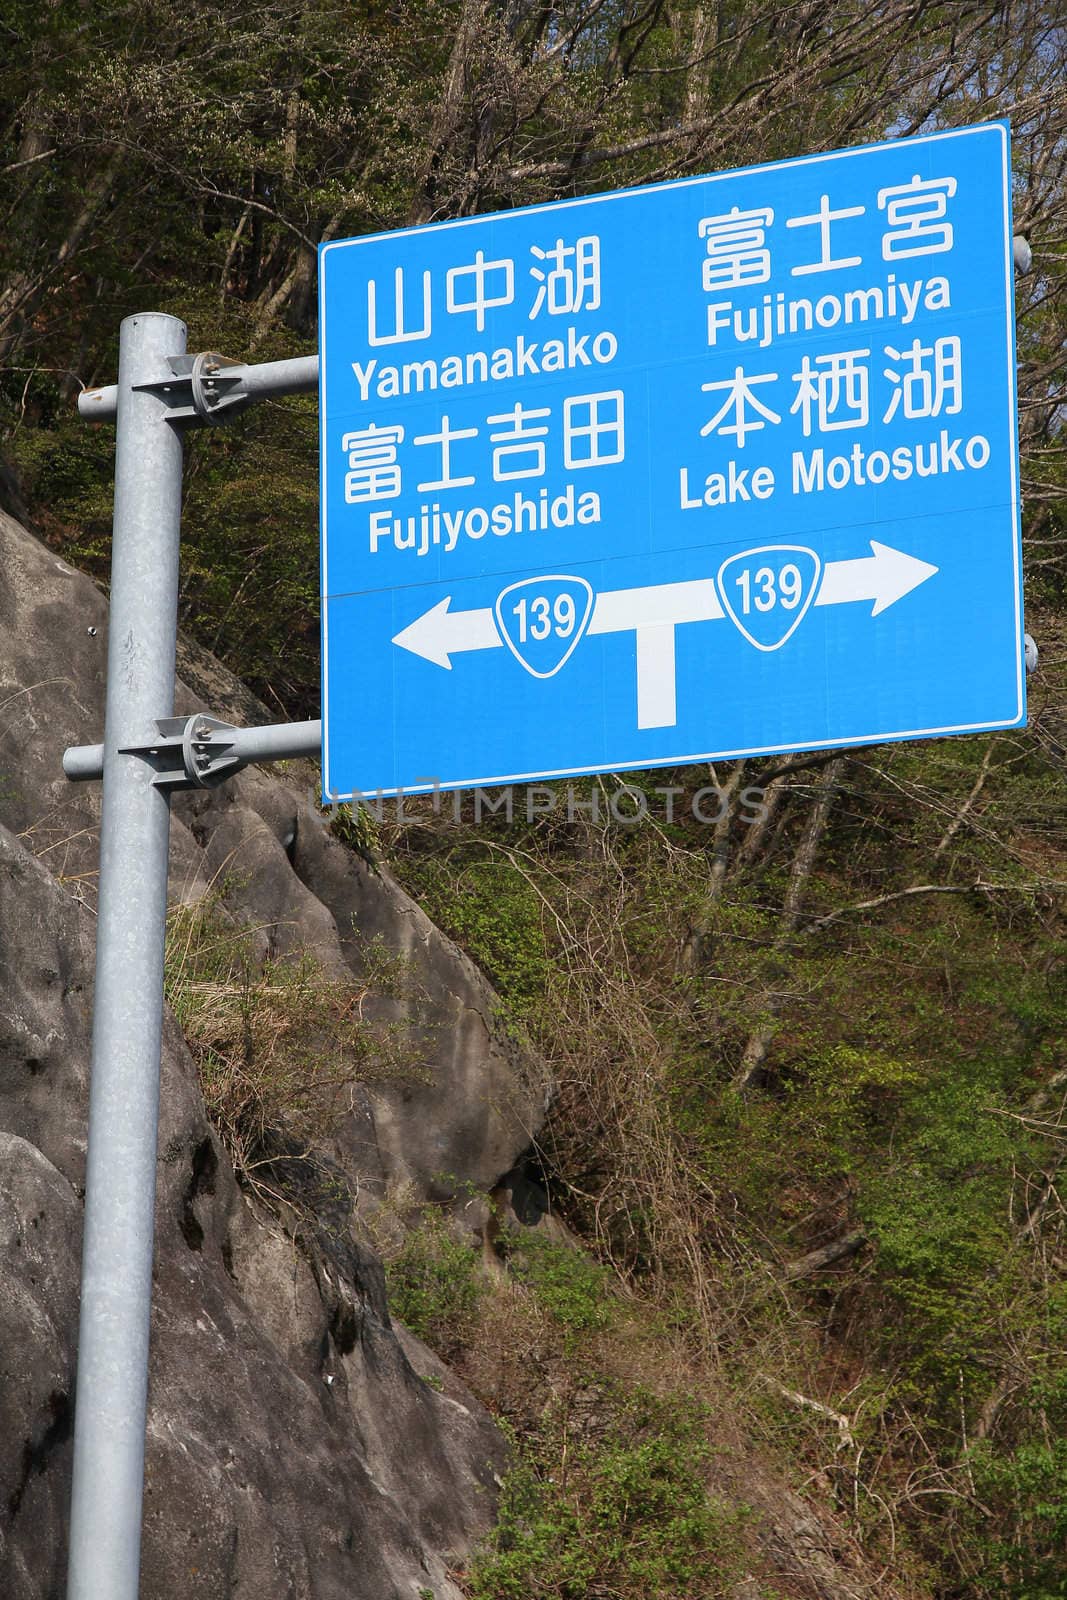 Road directions in Japan by tupungato